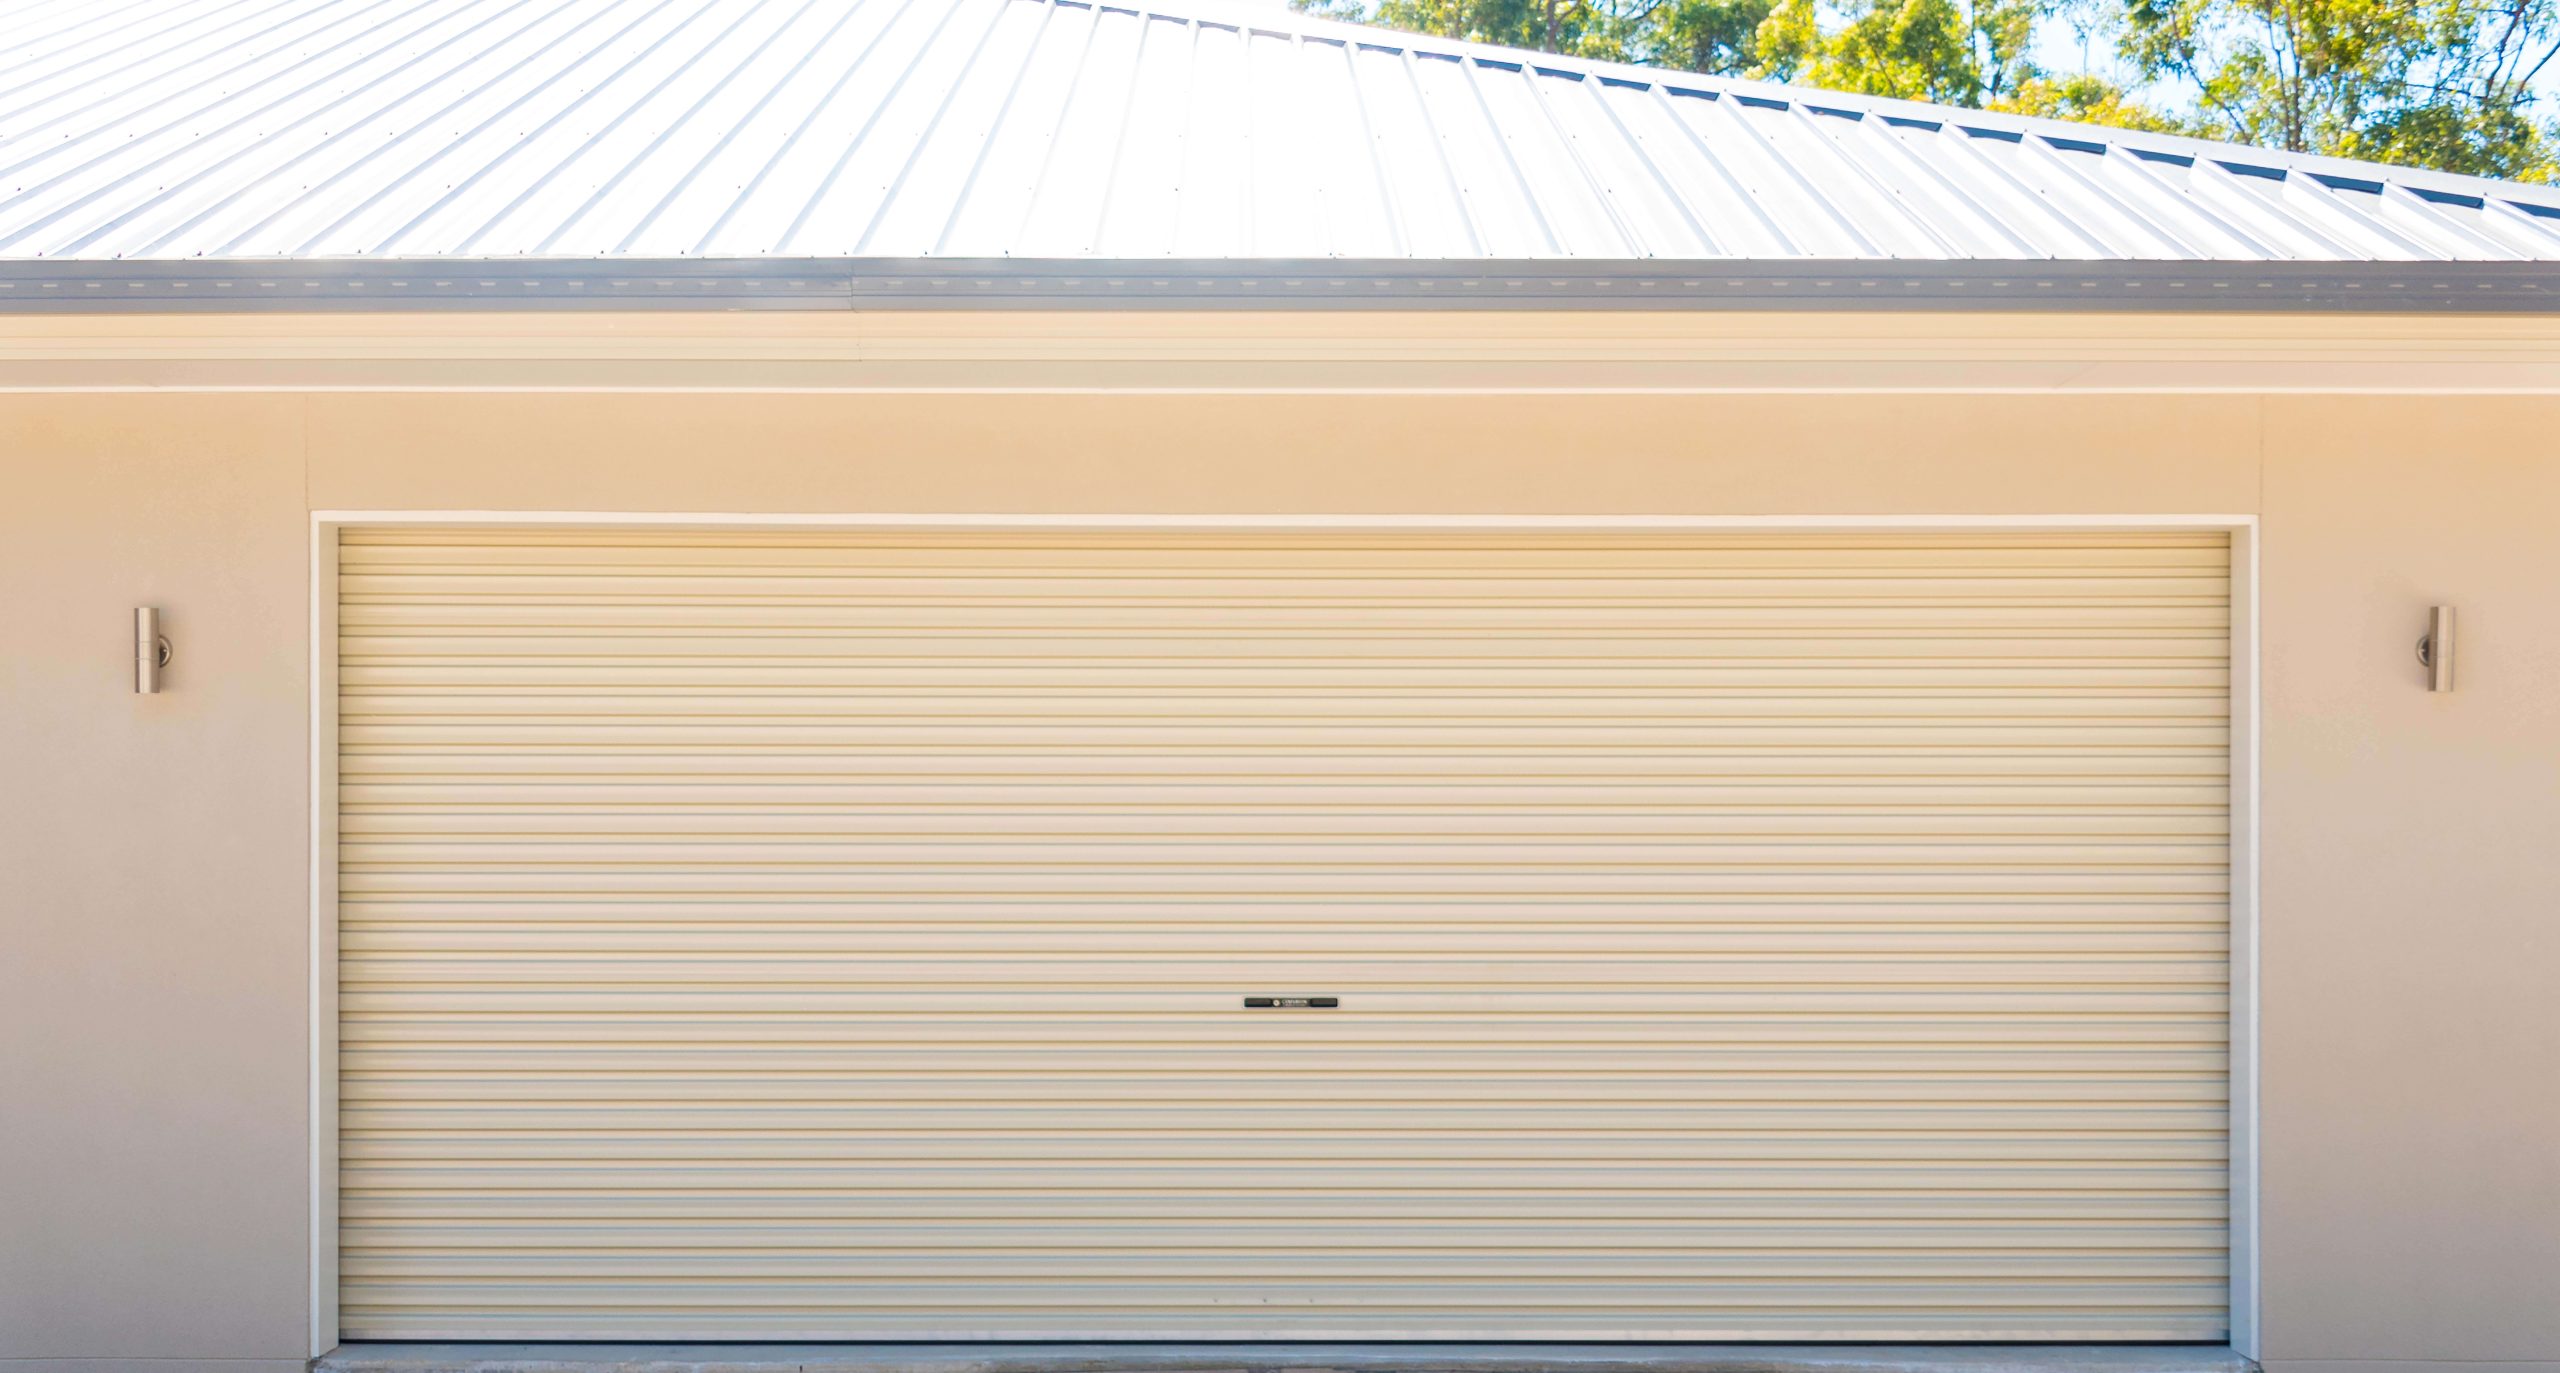 EDI3735 scaled 5 Reasons Why Upgrading Your Garage Roller Door Is A Smart Investment